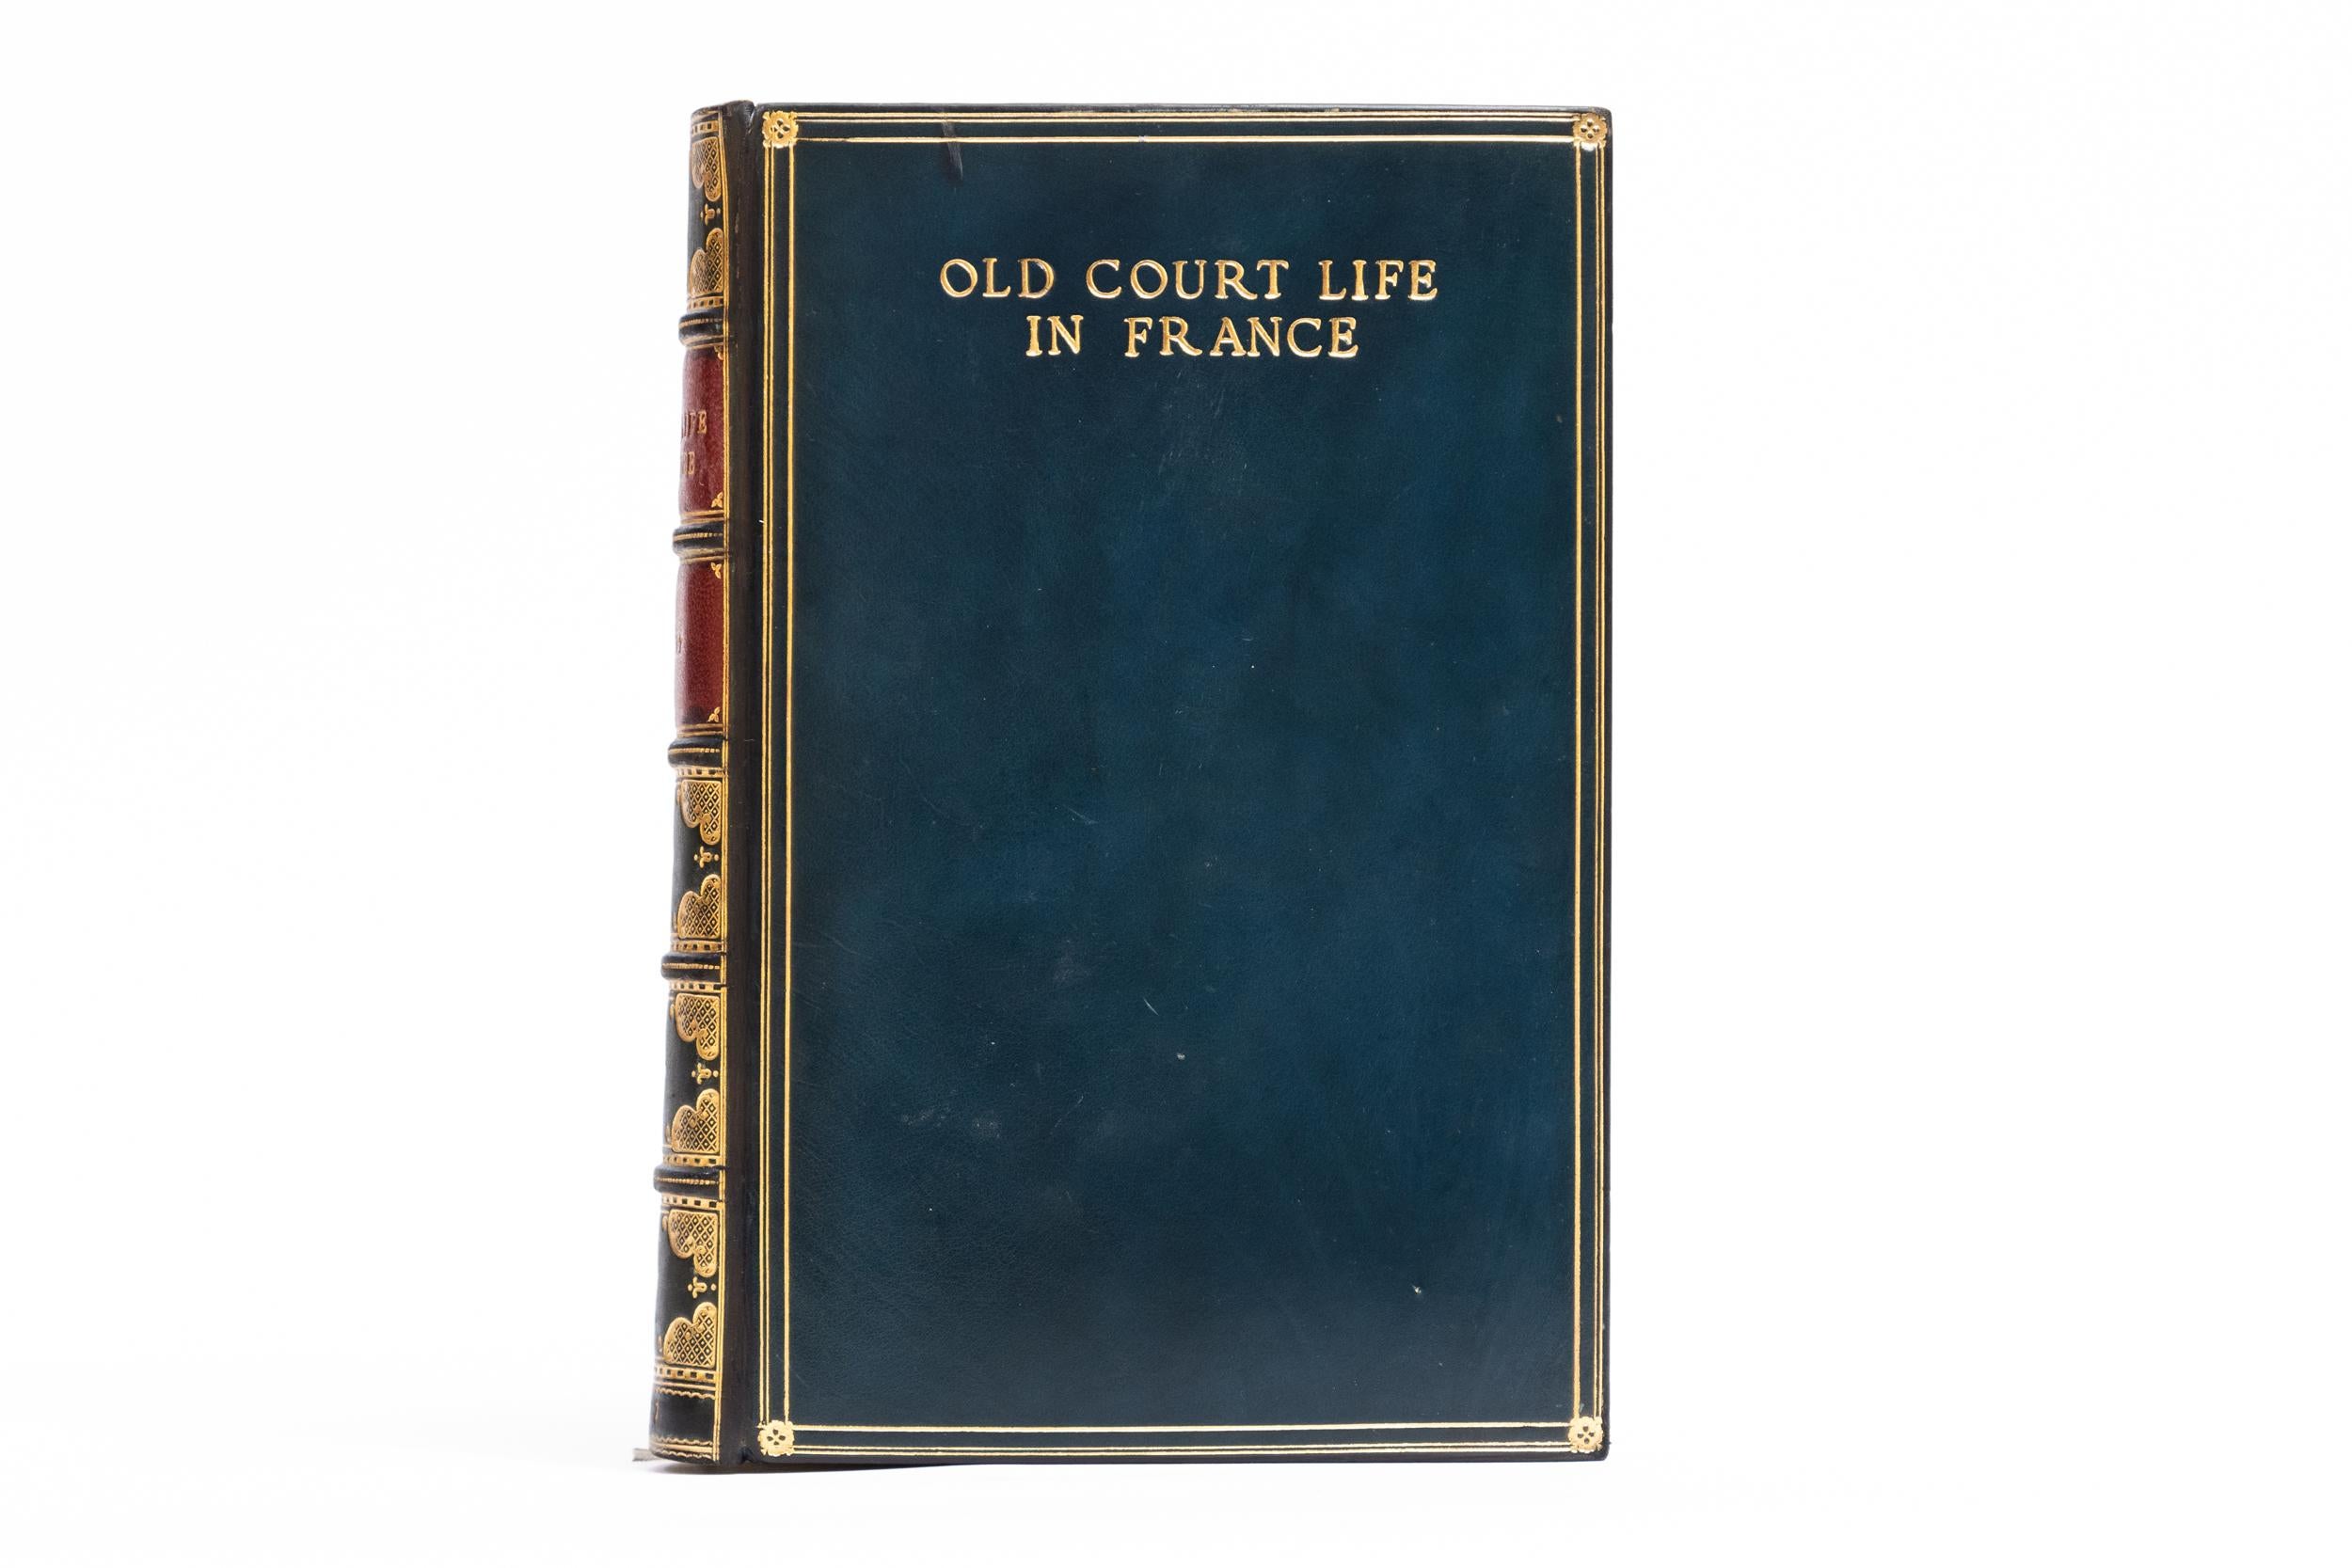 1 Volume. Frances Elliot, Old Court Life in France. Bound in full blue calf. Gilt-tooled title on front cover. Raised bands. All edges gilt. Marbled endpapers. Decorative gilt on spines. Binding by Sangorski & Sutcliffe. Includes 58 illustrations.